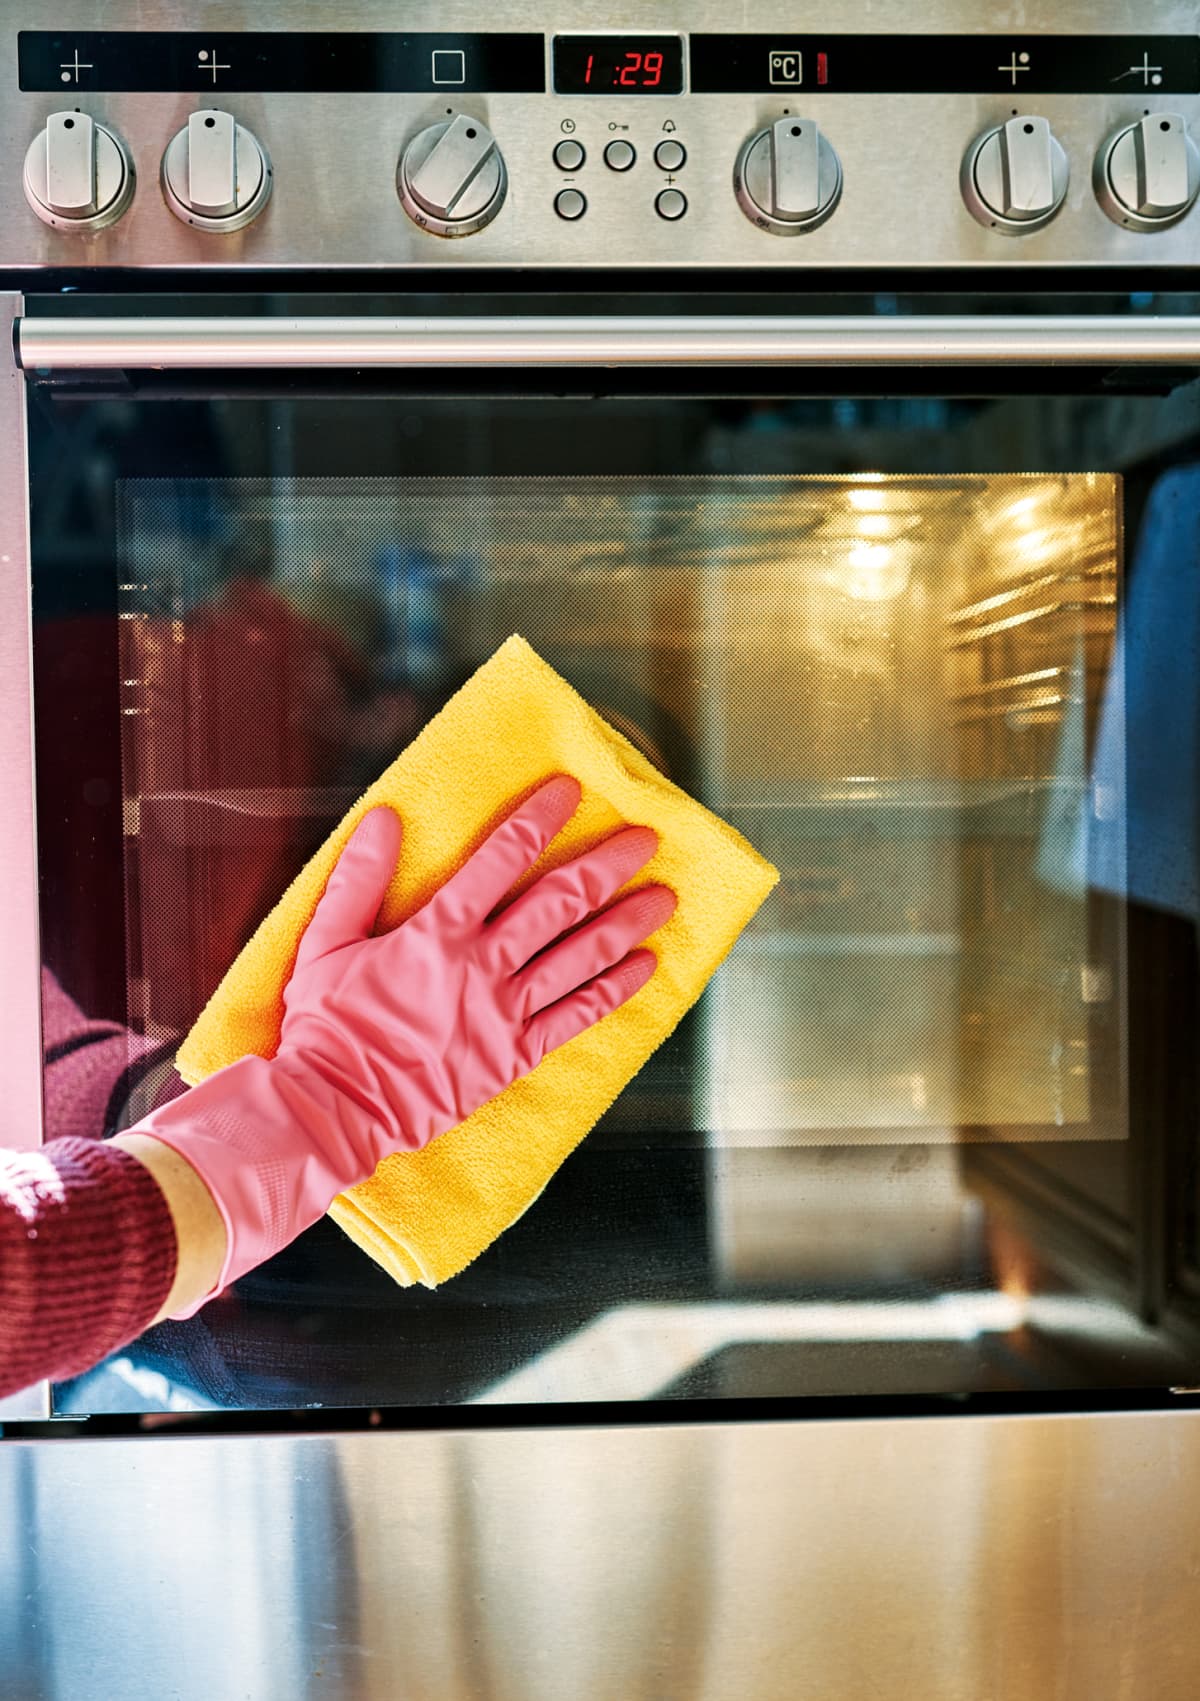 A person wiping the oven door with a cloth.